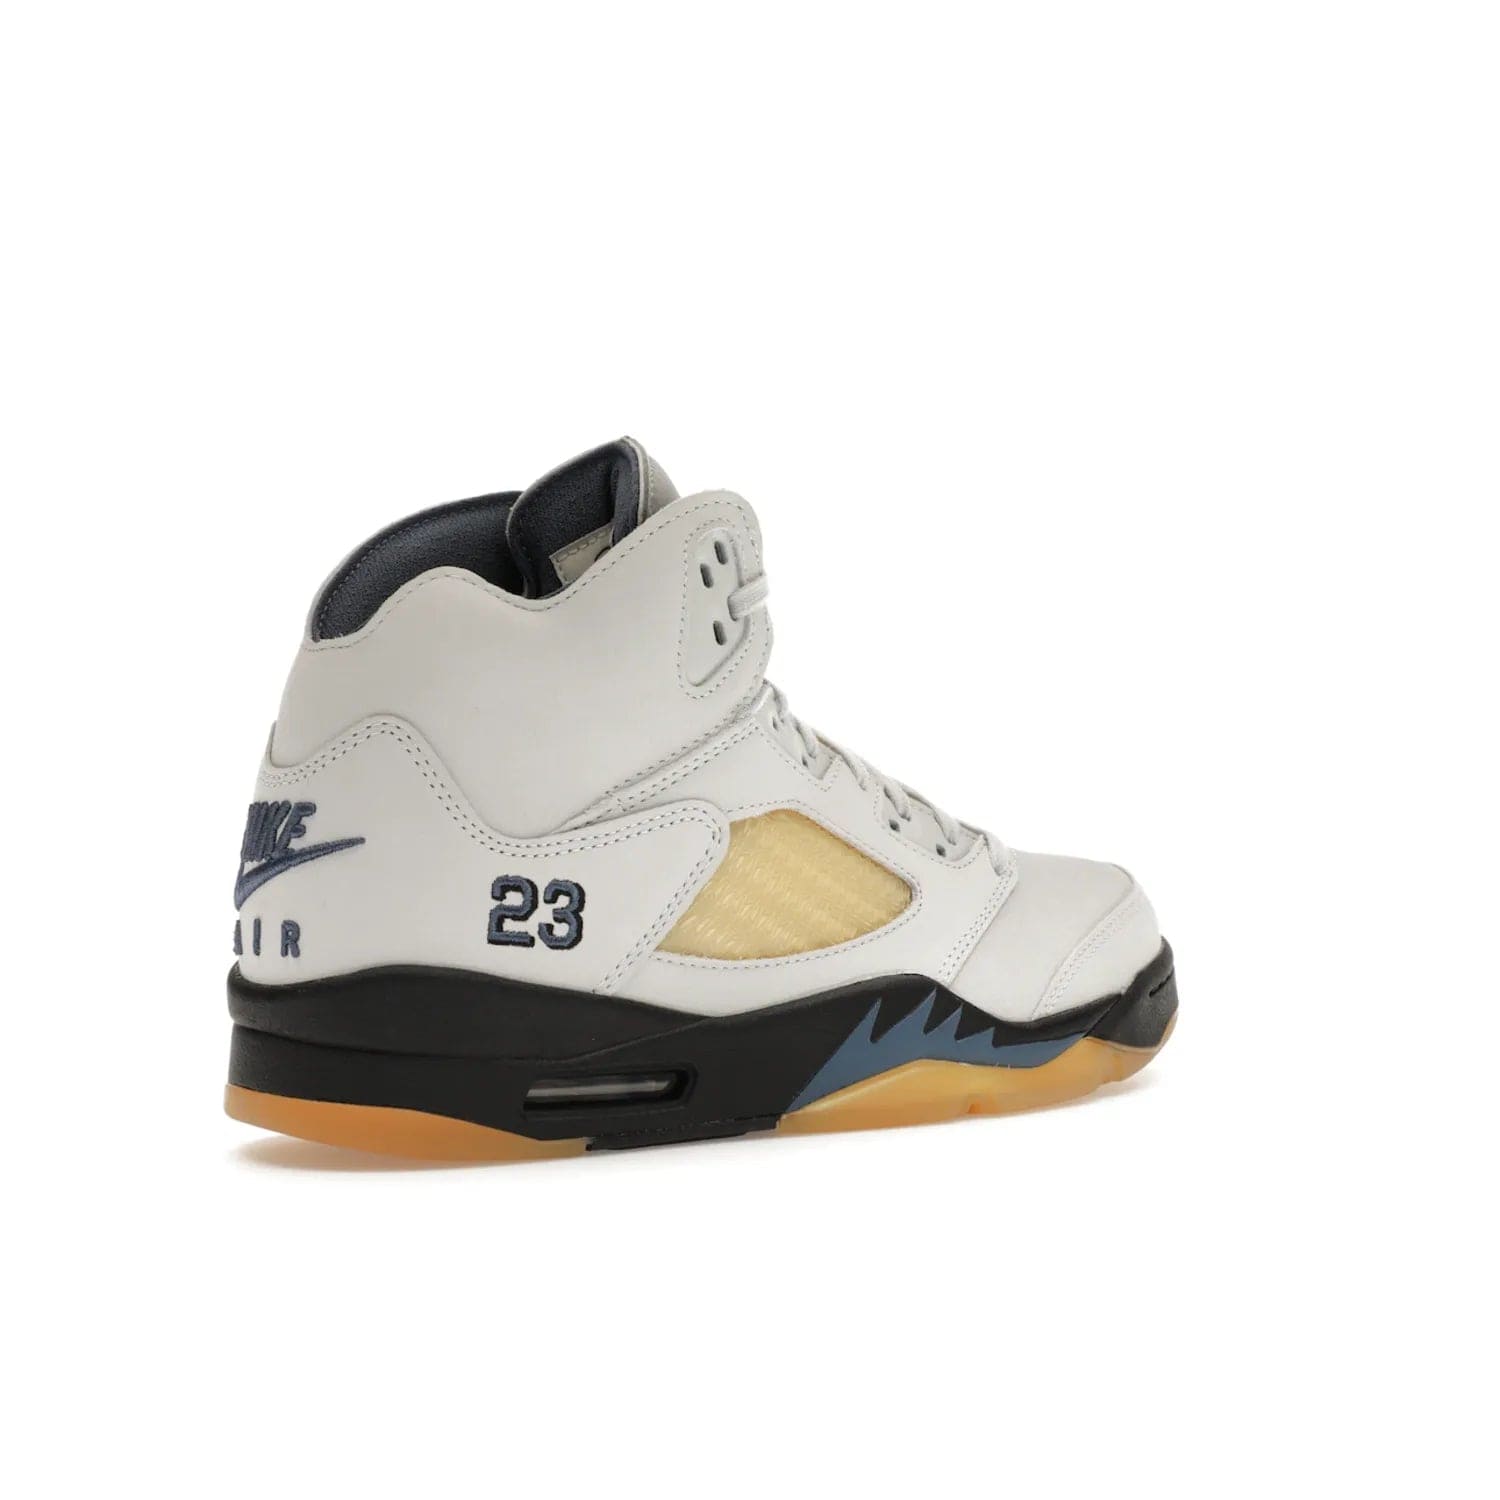 Jordan 5 Retro A Ma Maniére Dawn (Women's) - Image 33 - Only at www.BallersClubKickz.com - Catch the exclusive Air Jordan 5 Retro A Ma Maniére "Dawn" – a modern classic that combines elegance and street style. Get a gleaming metallic silver tongue, the iconic "23" heel, and signature shark teeth pattern. A Photon Dust/Black/Diffused Blue/Pale Ivory colorway, slimmed-down collar, and pre-yellowed quarter panel netting make this sneaker a must-have. Get your pair on November 17 and seize